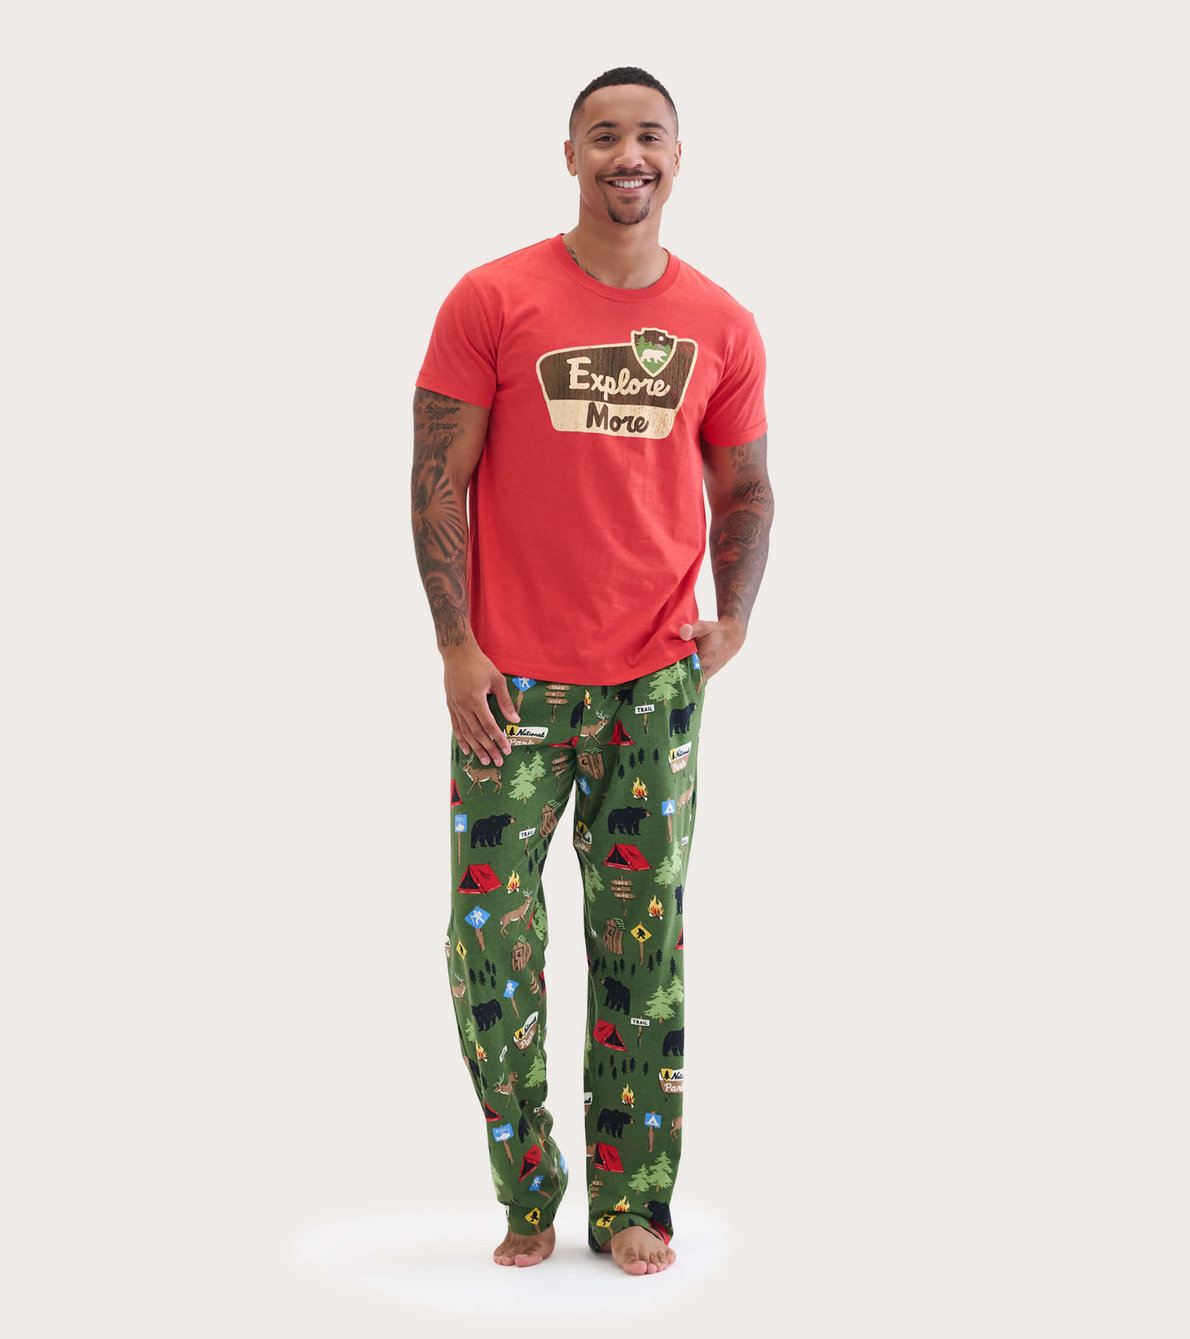 View larger image of Explore More Men's Tee and Pants Pajama Separates